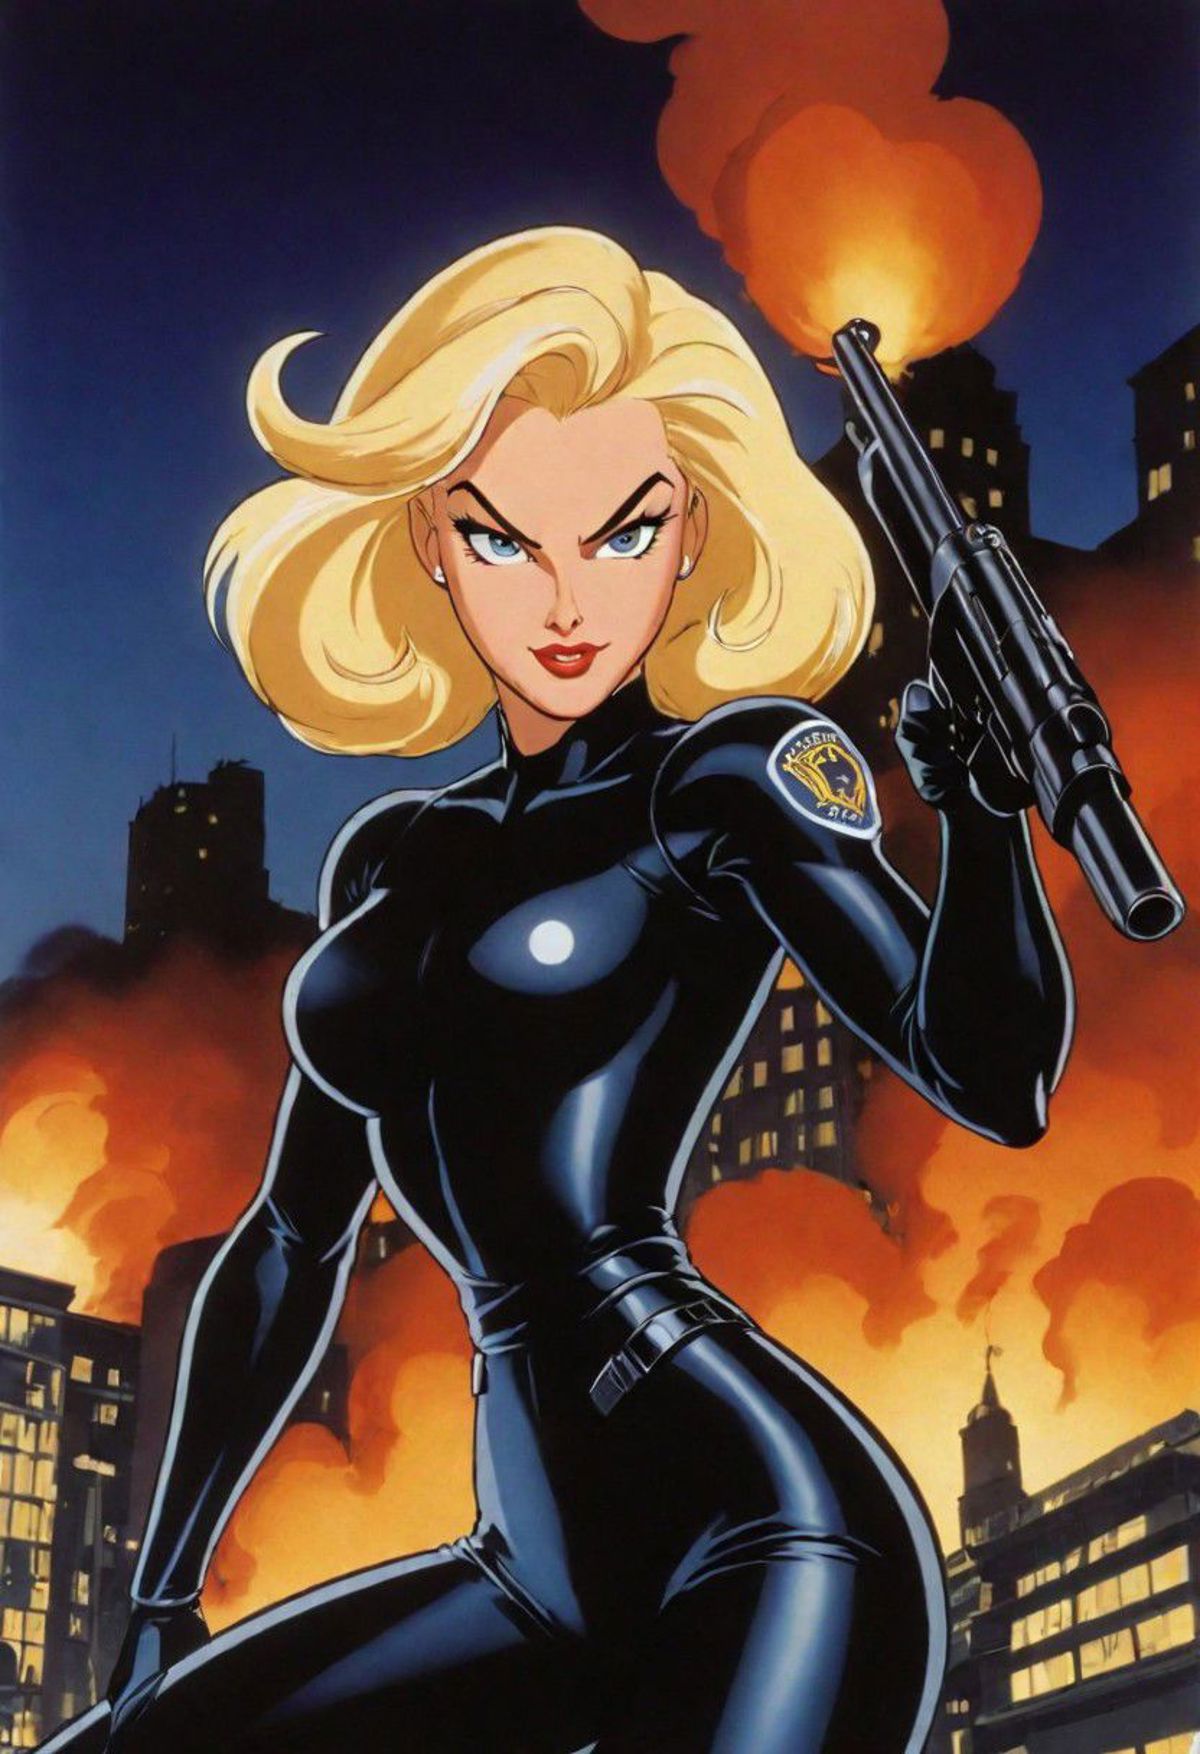 A comic book style drawing of a woman in a black suit holding a gun.